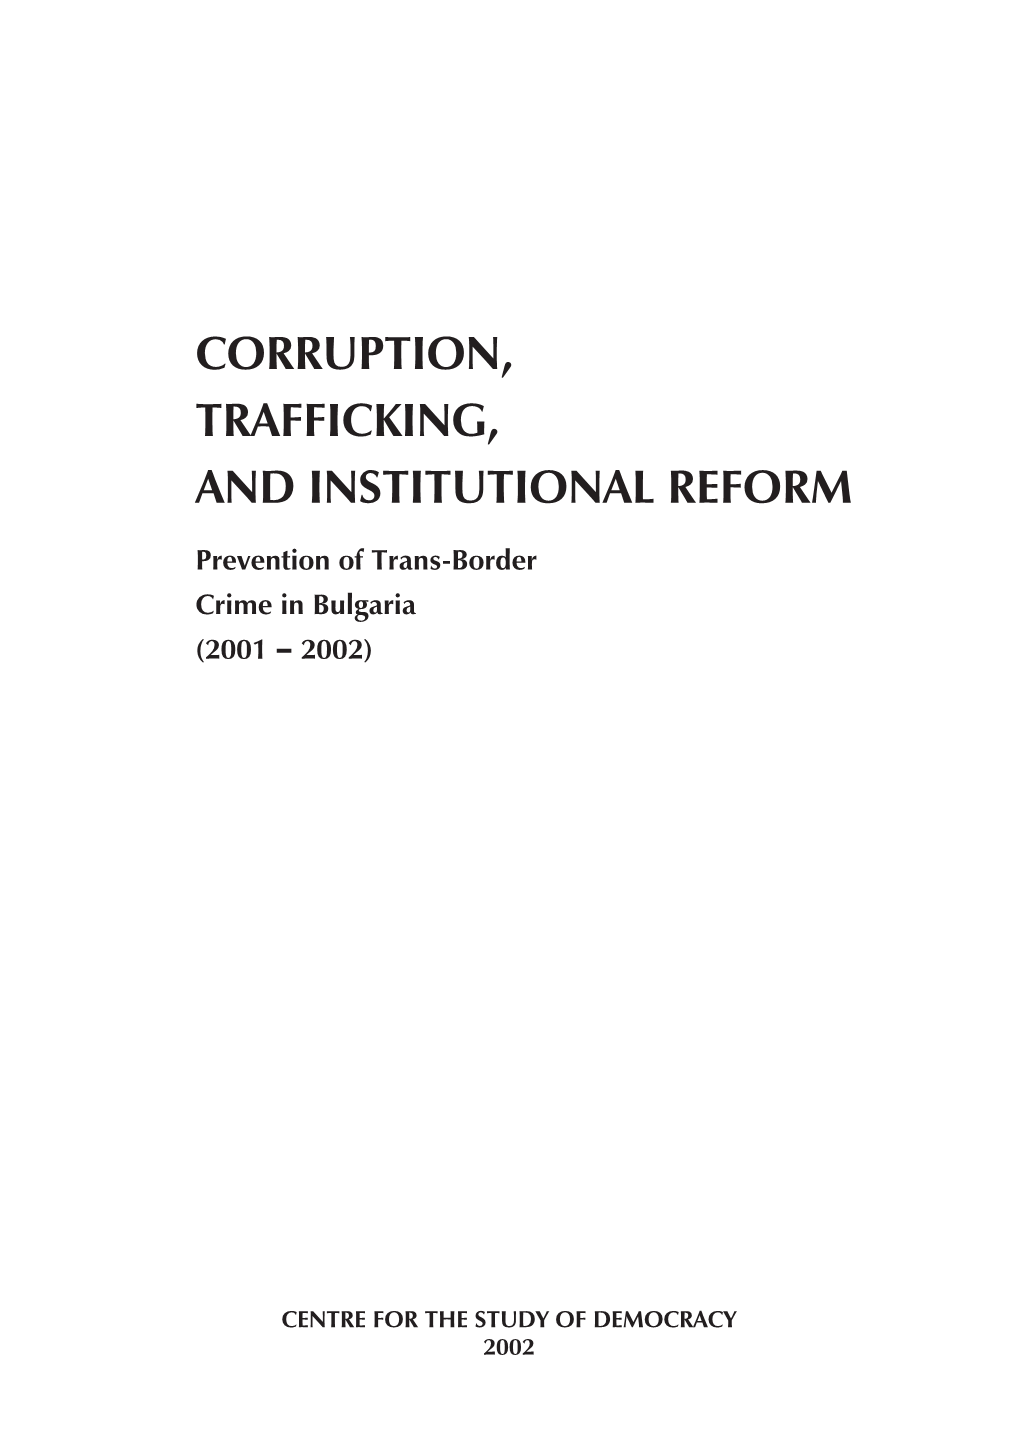 Corruption, Trafficking, and Institutional Reform